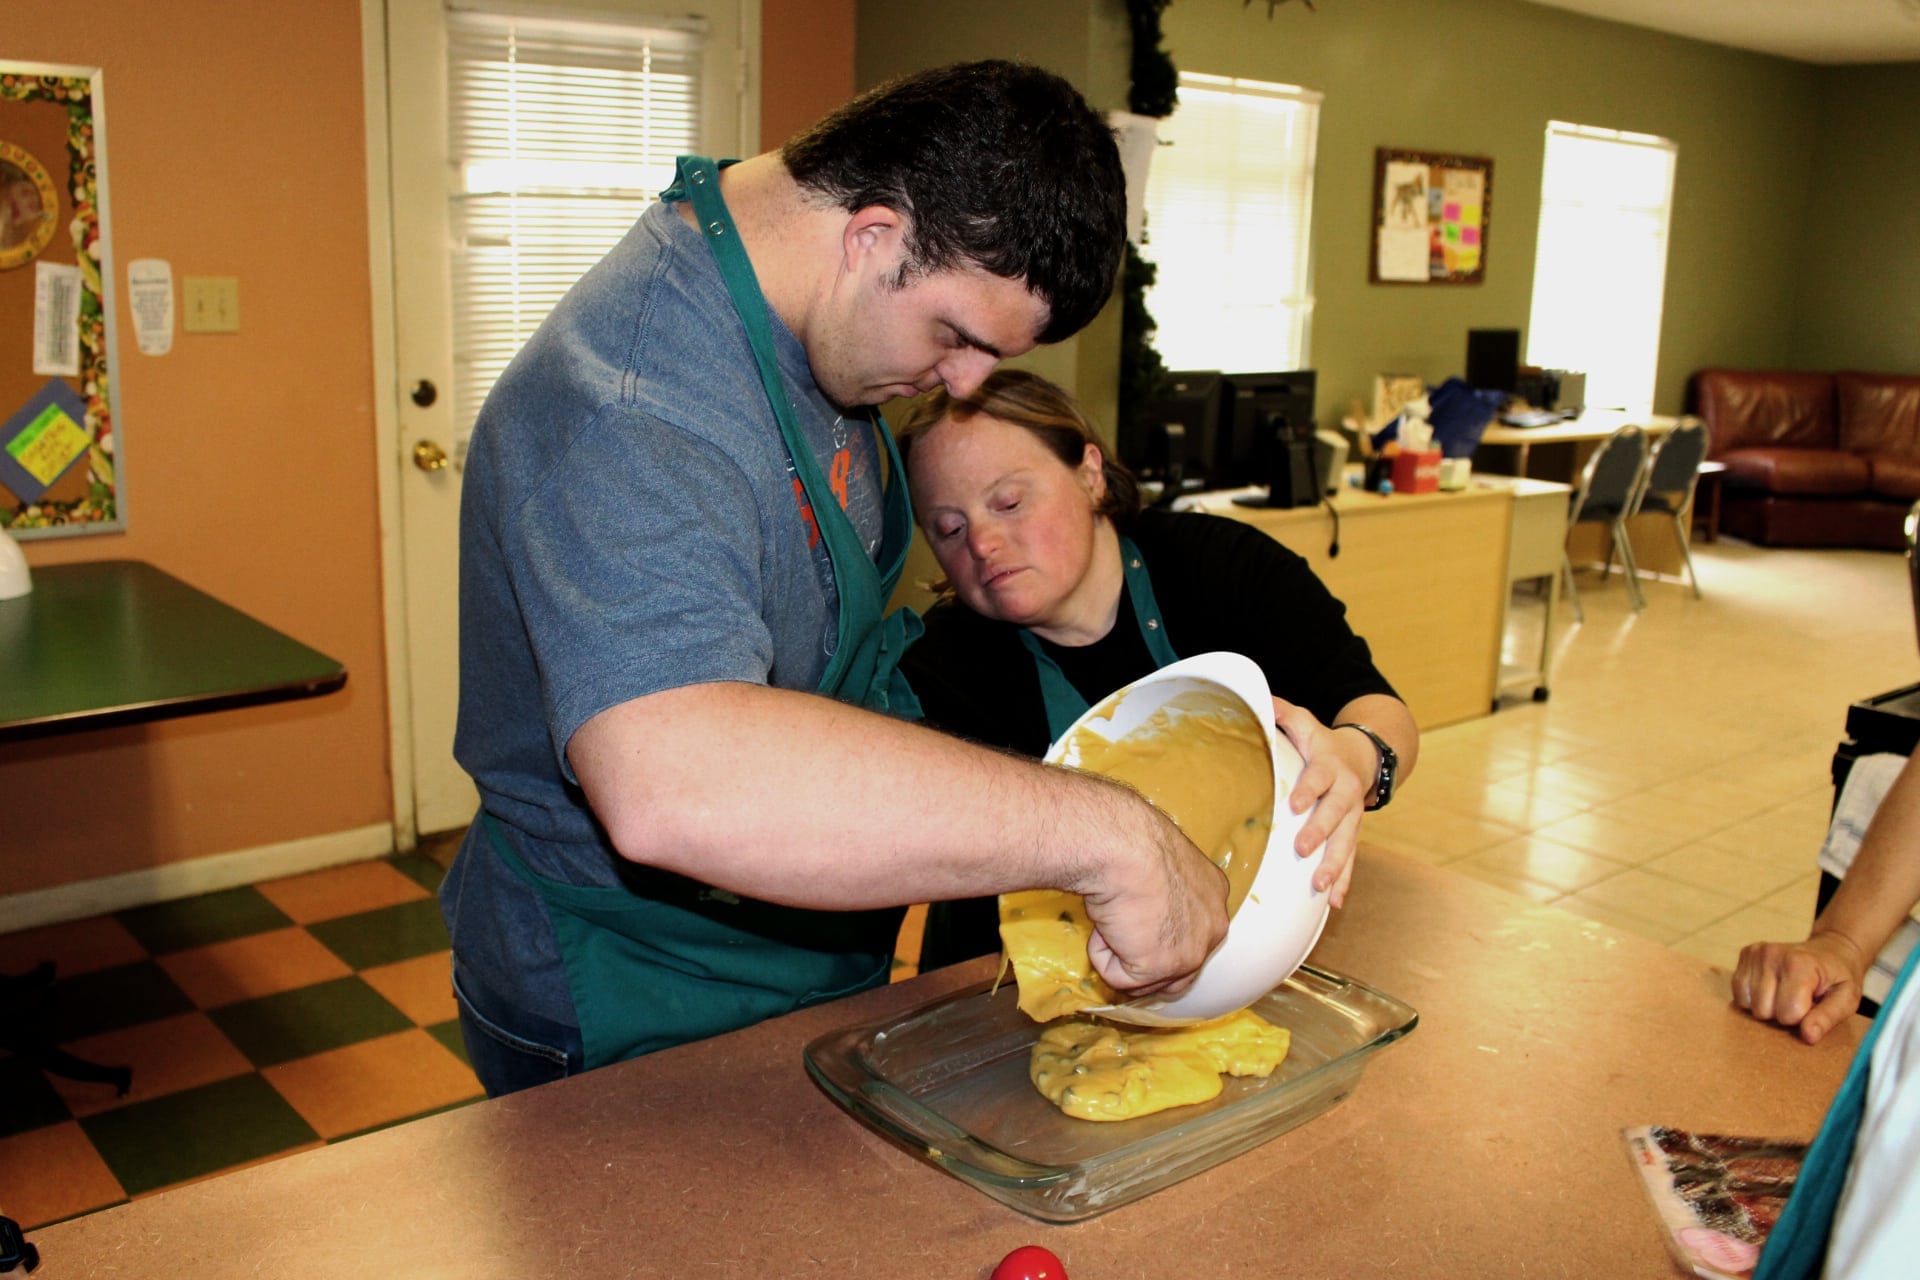 A man and a woman preparing food in a kitchen during a cooking class.